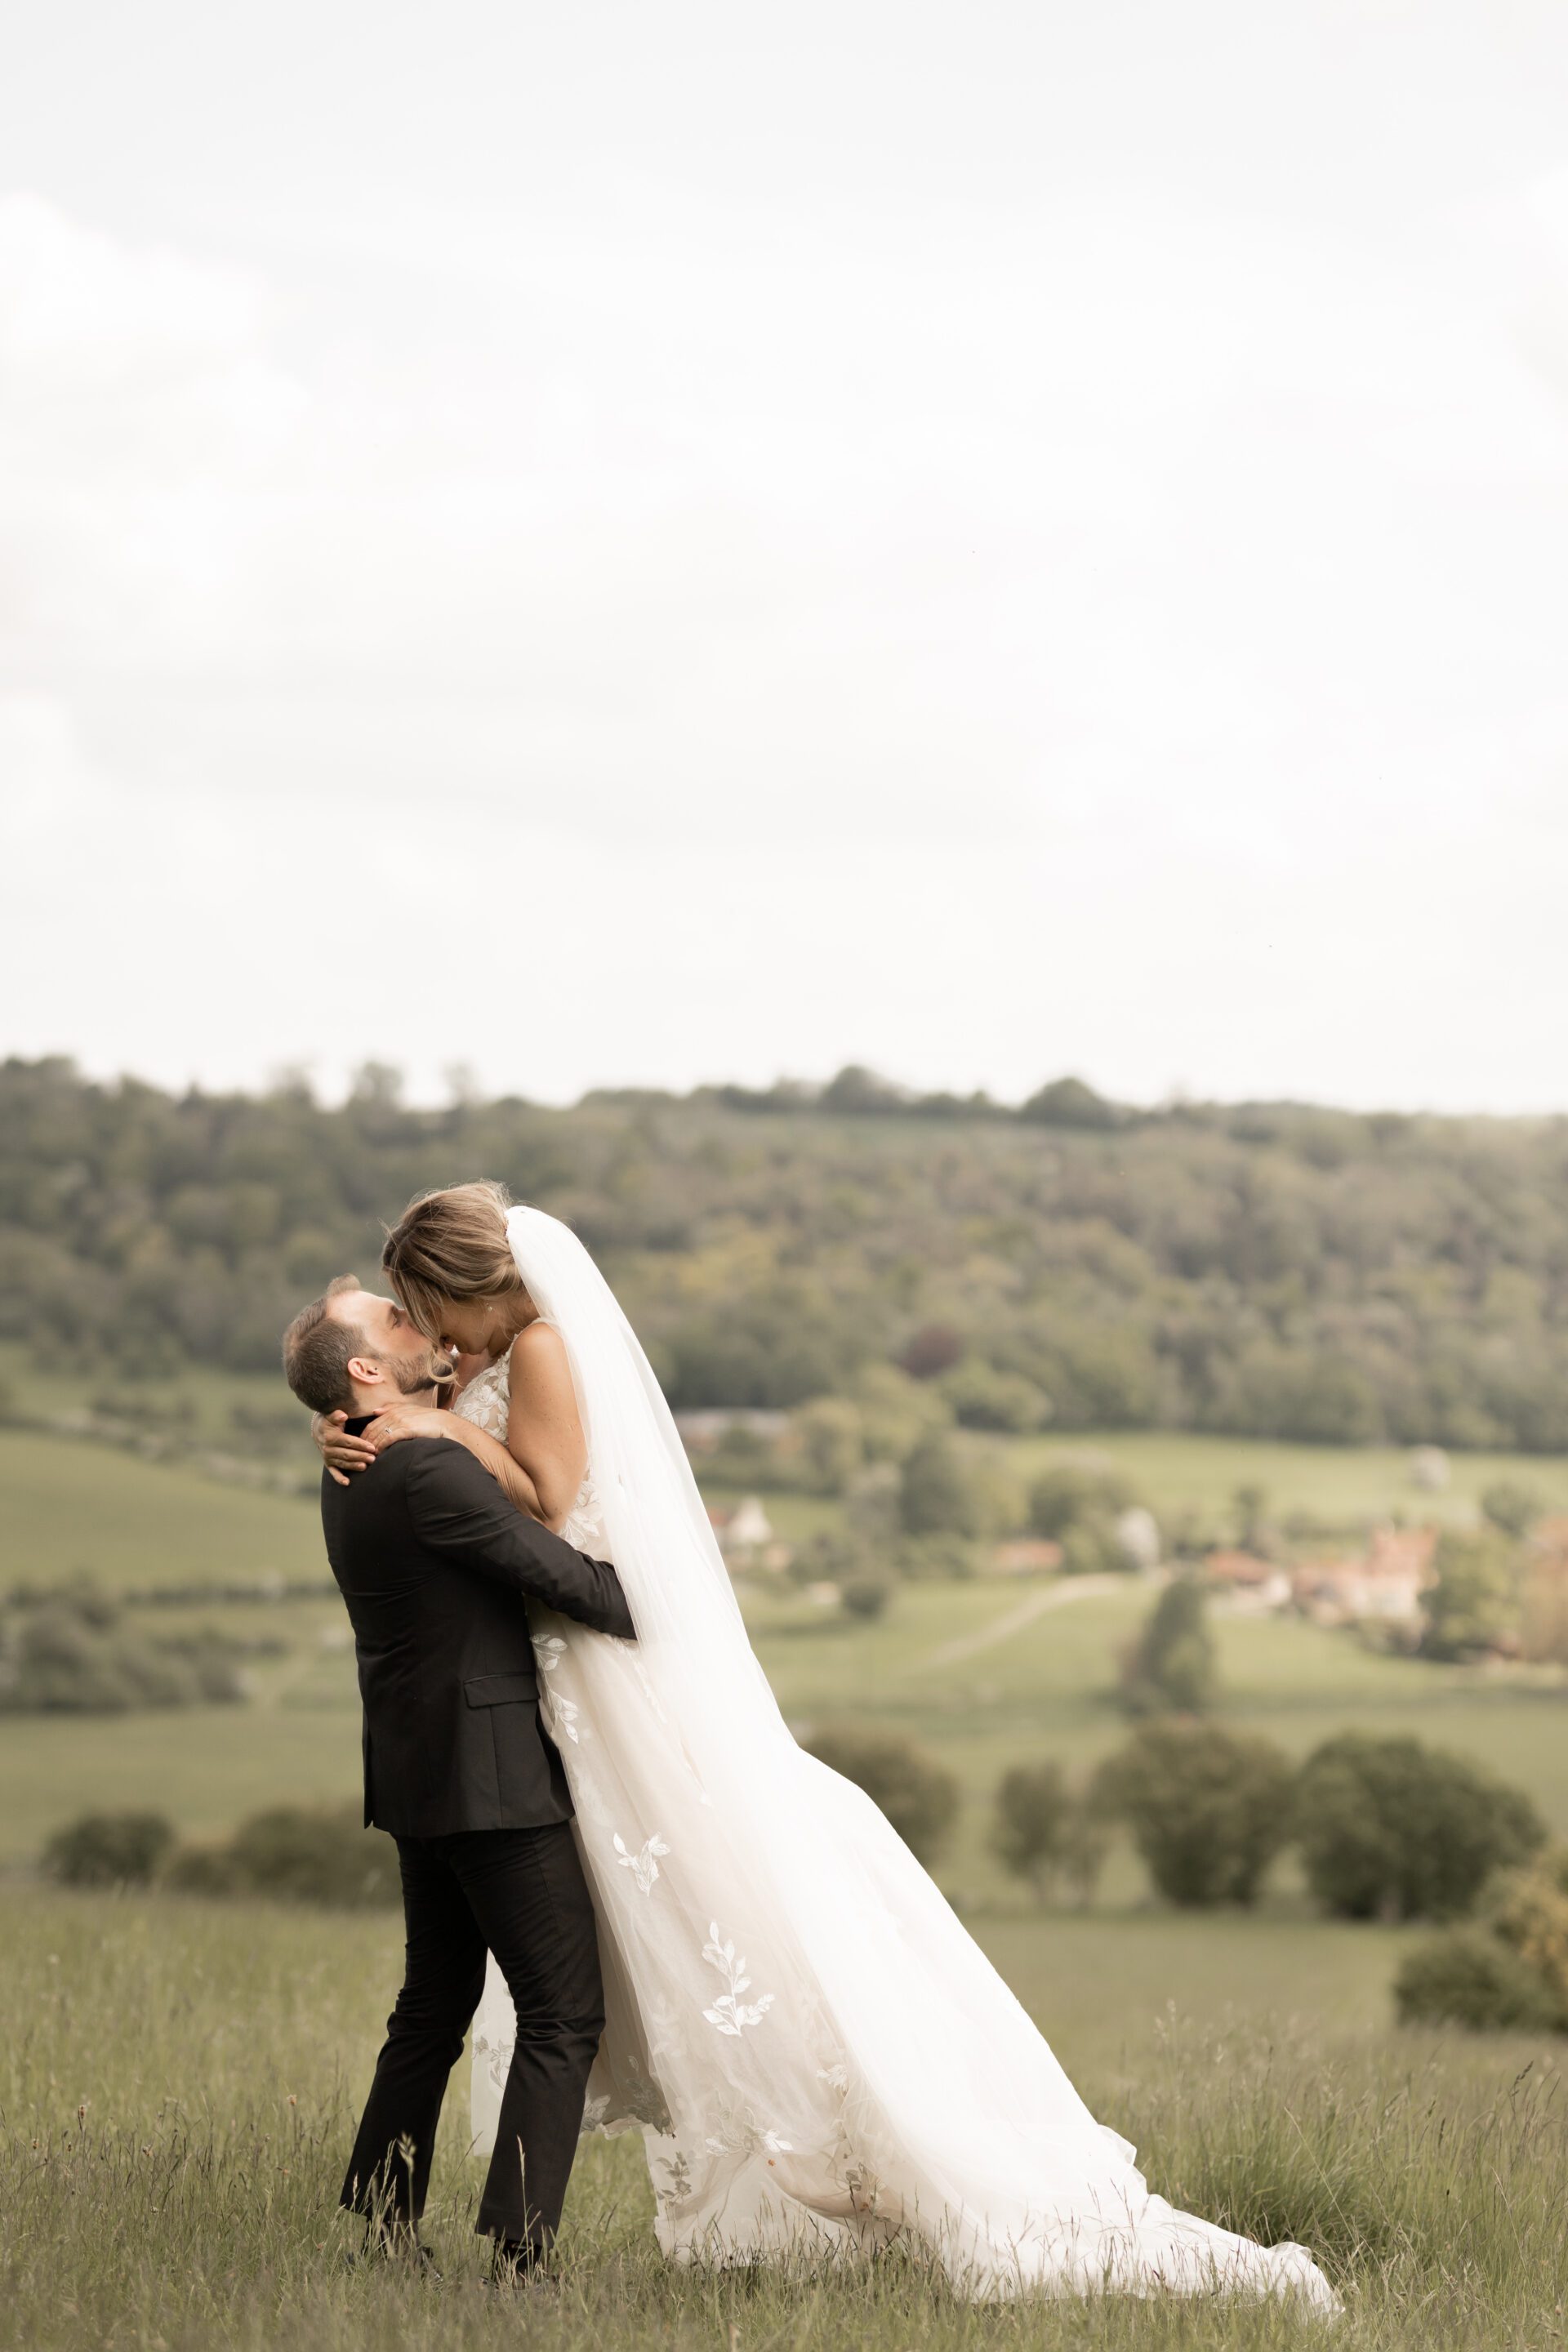 The groom embraces his bride at Old Luxters Barn in Oxfordshire